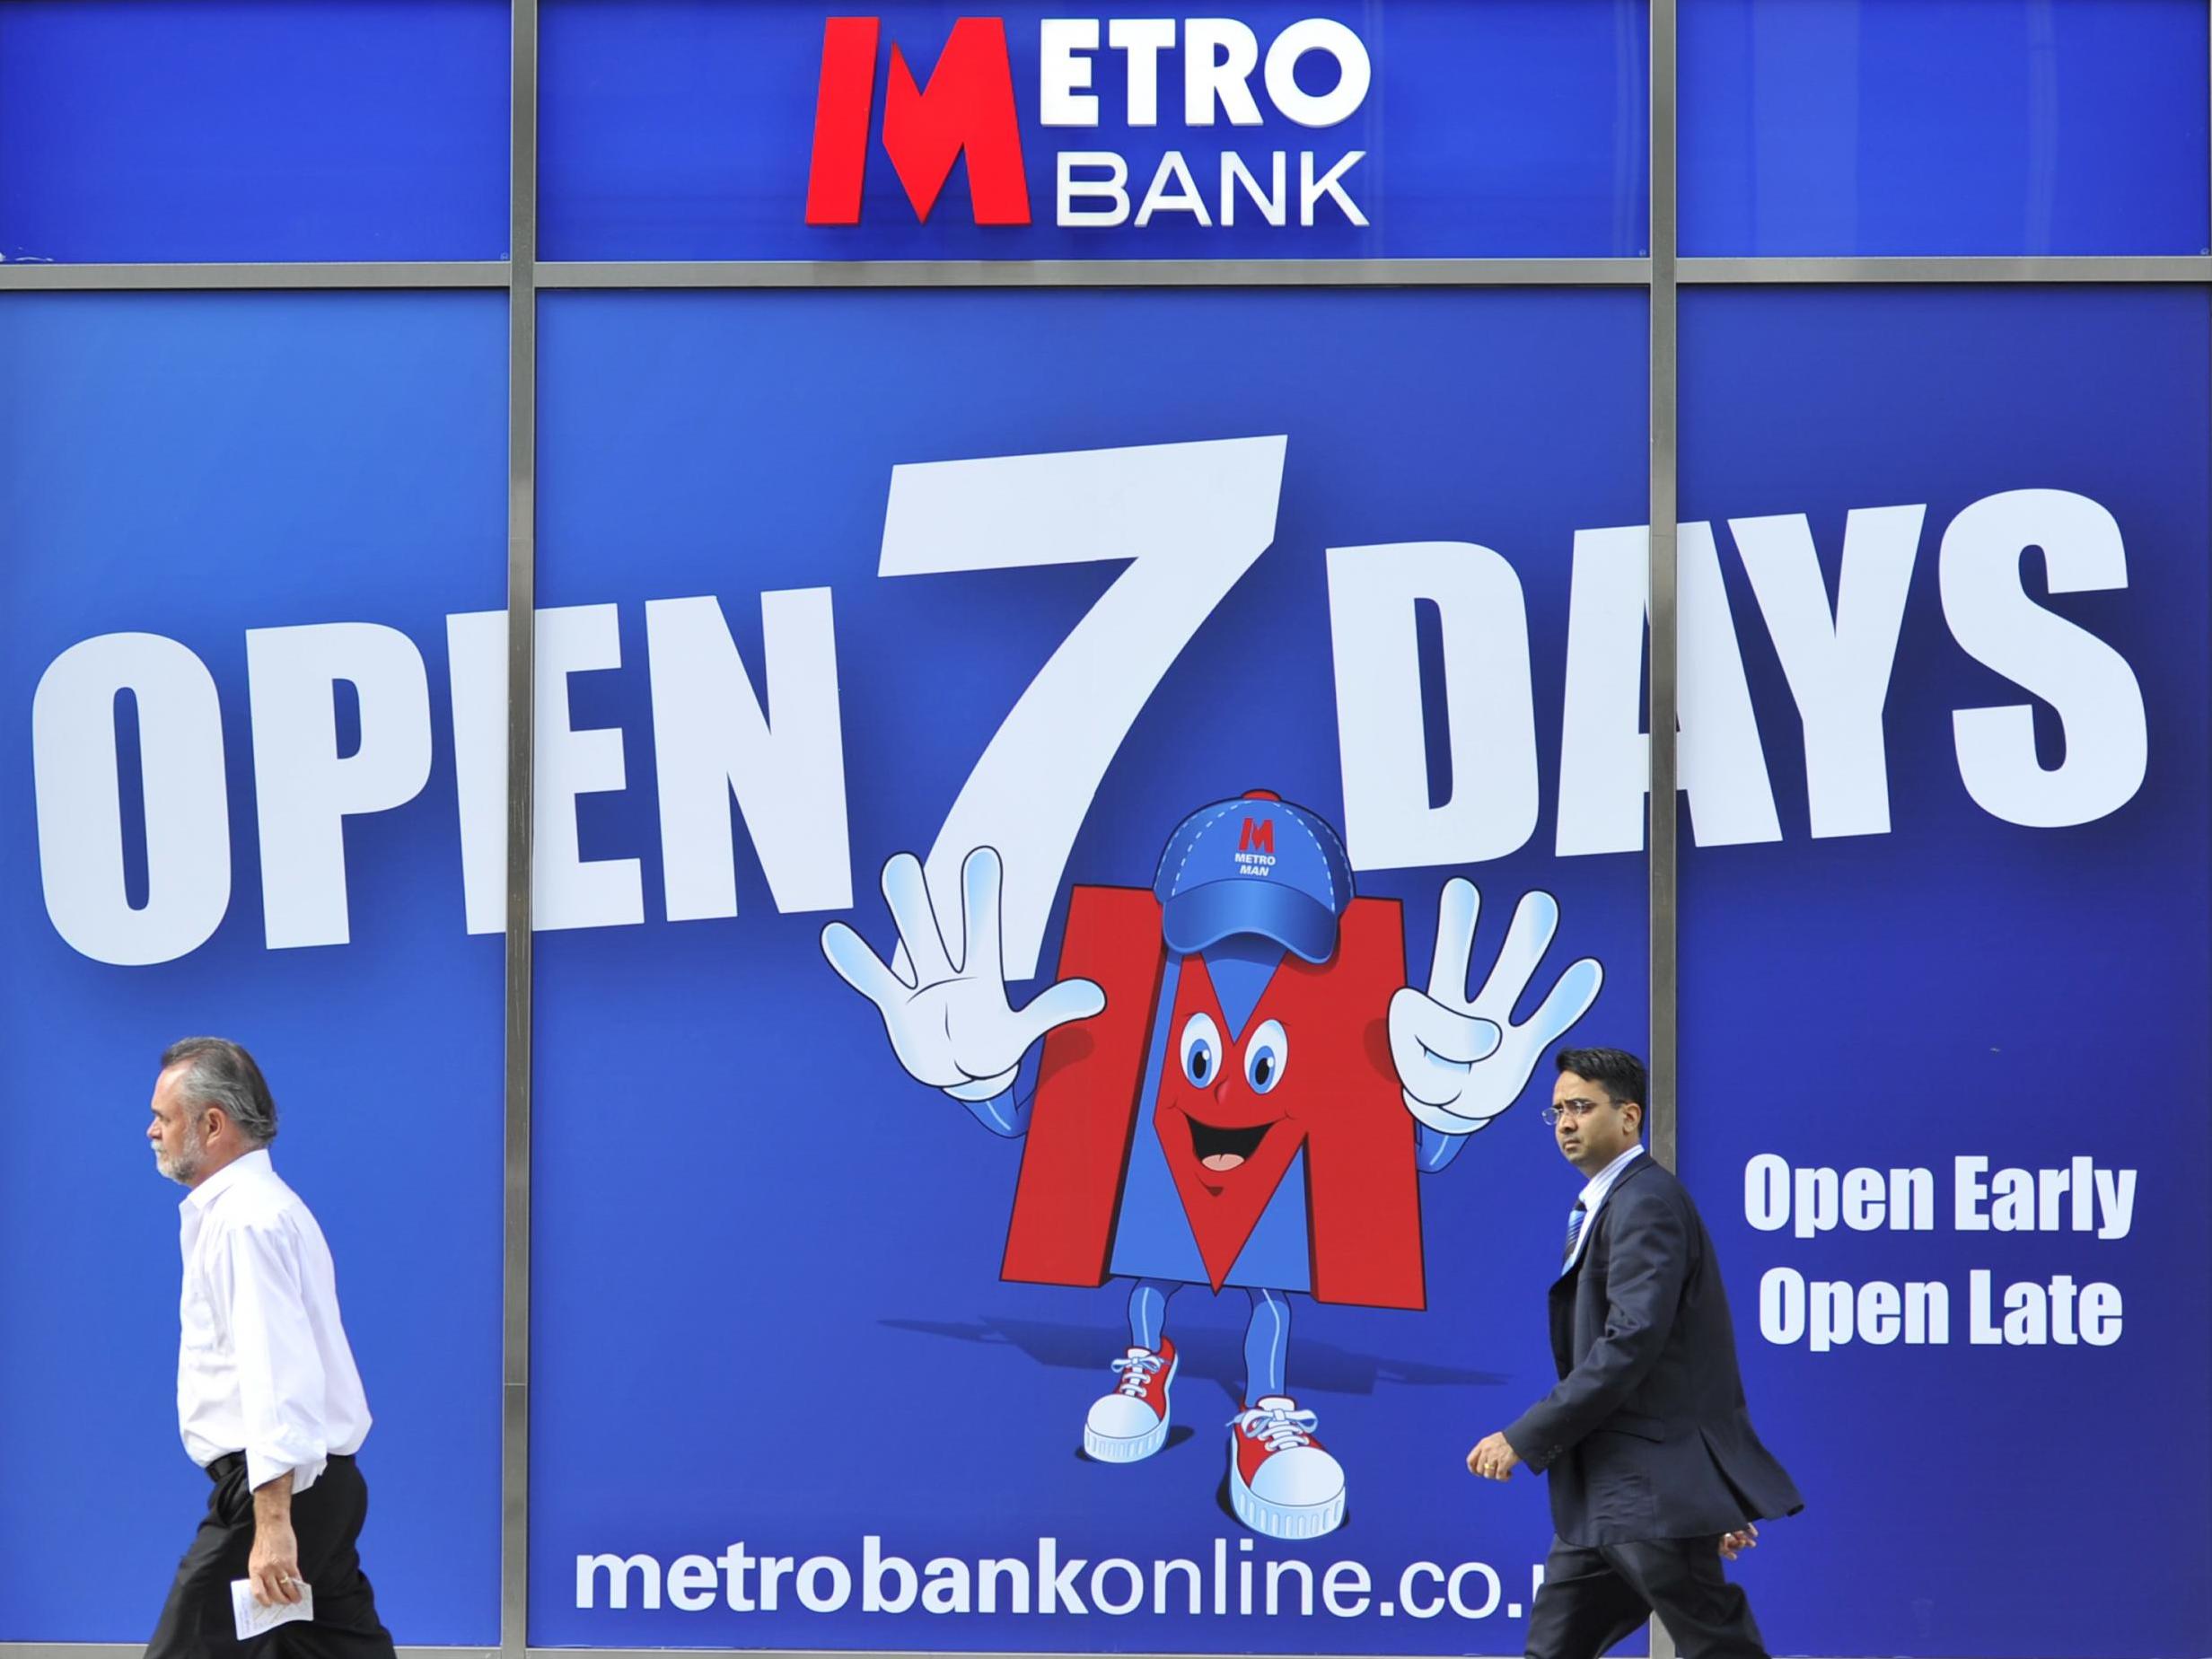 Metro Bank: A welcome addition to the UK banking market